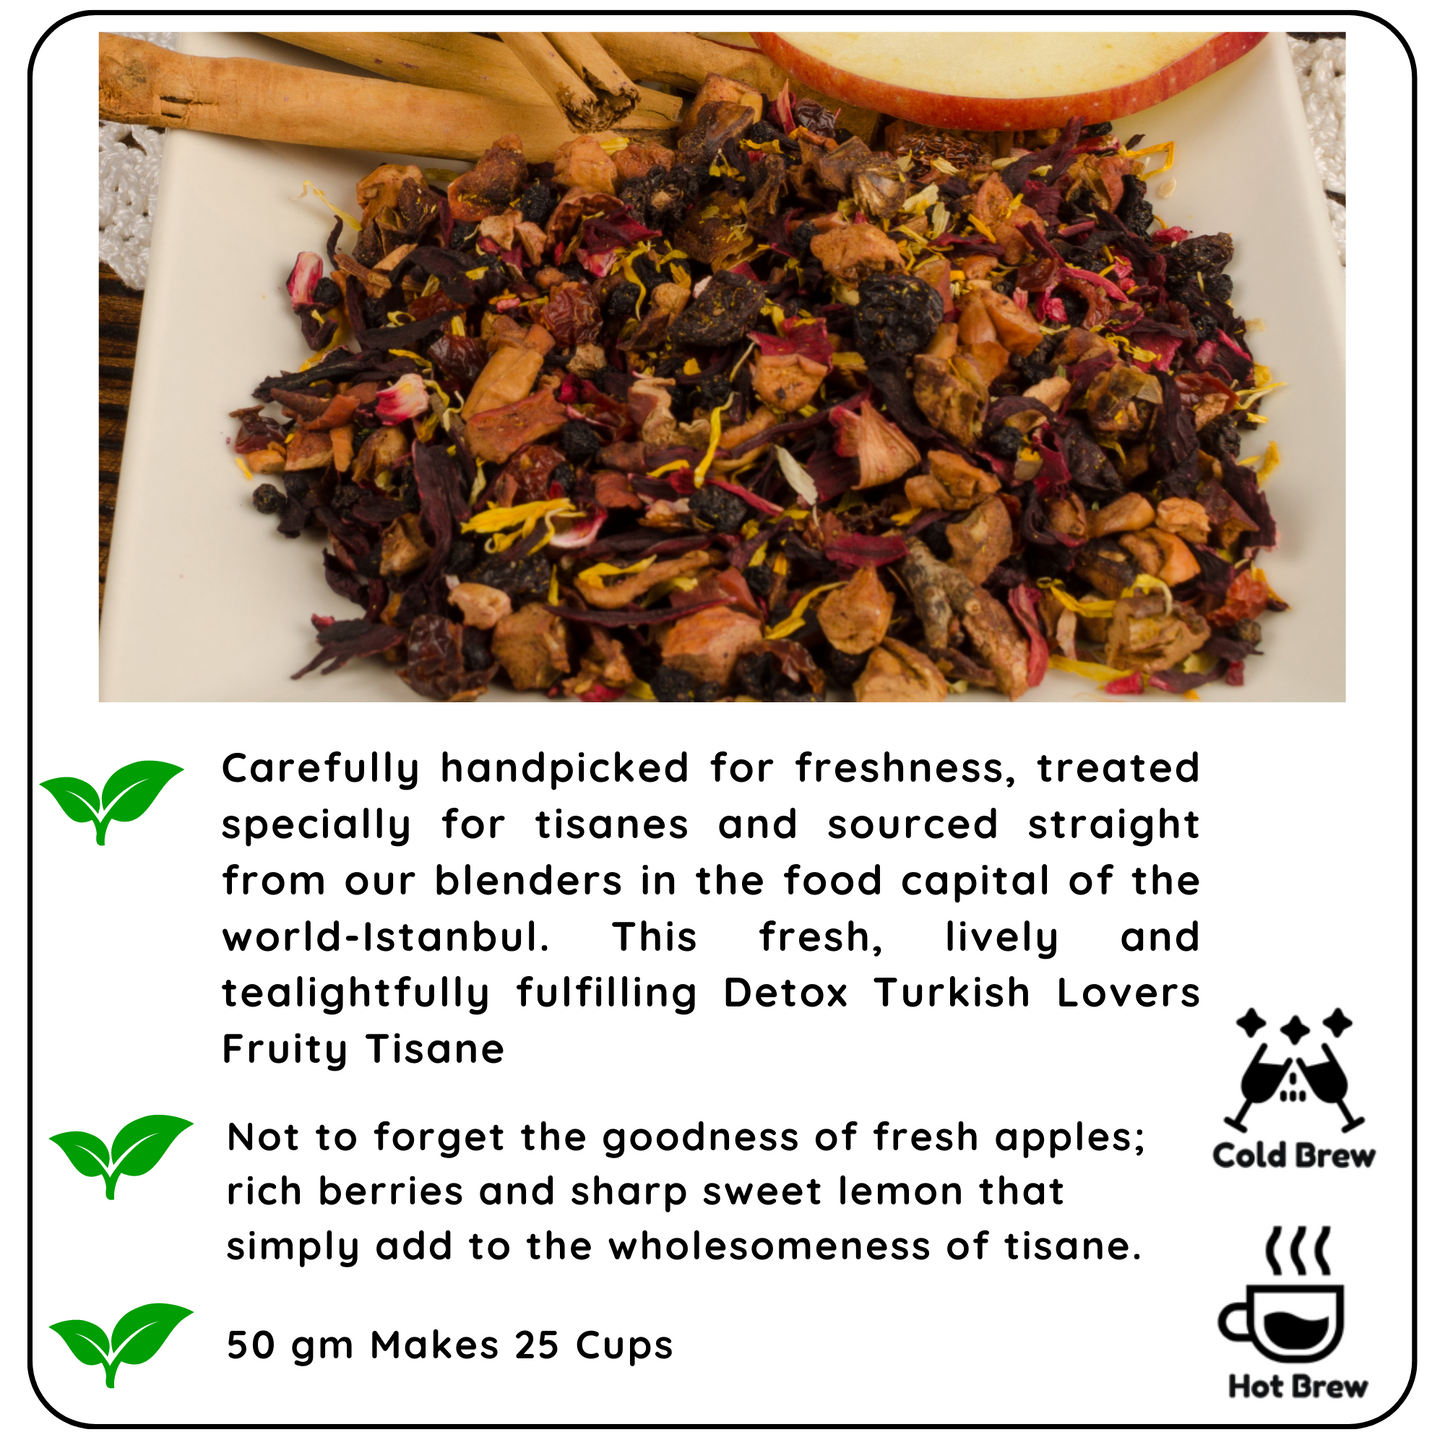 DETOX Turkish Lovers Fruity Tisane - A Delicious Way to Nourish Your Skin and Soul - Radhikas Fine Teas and Whatnots